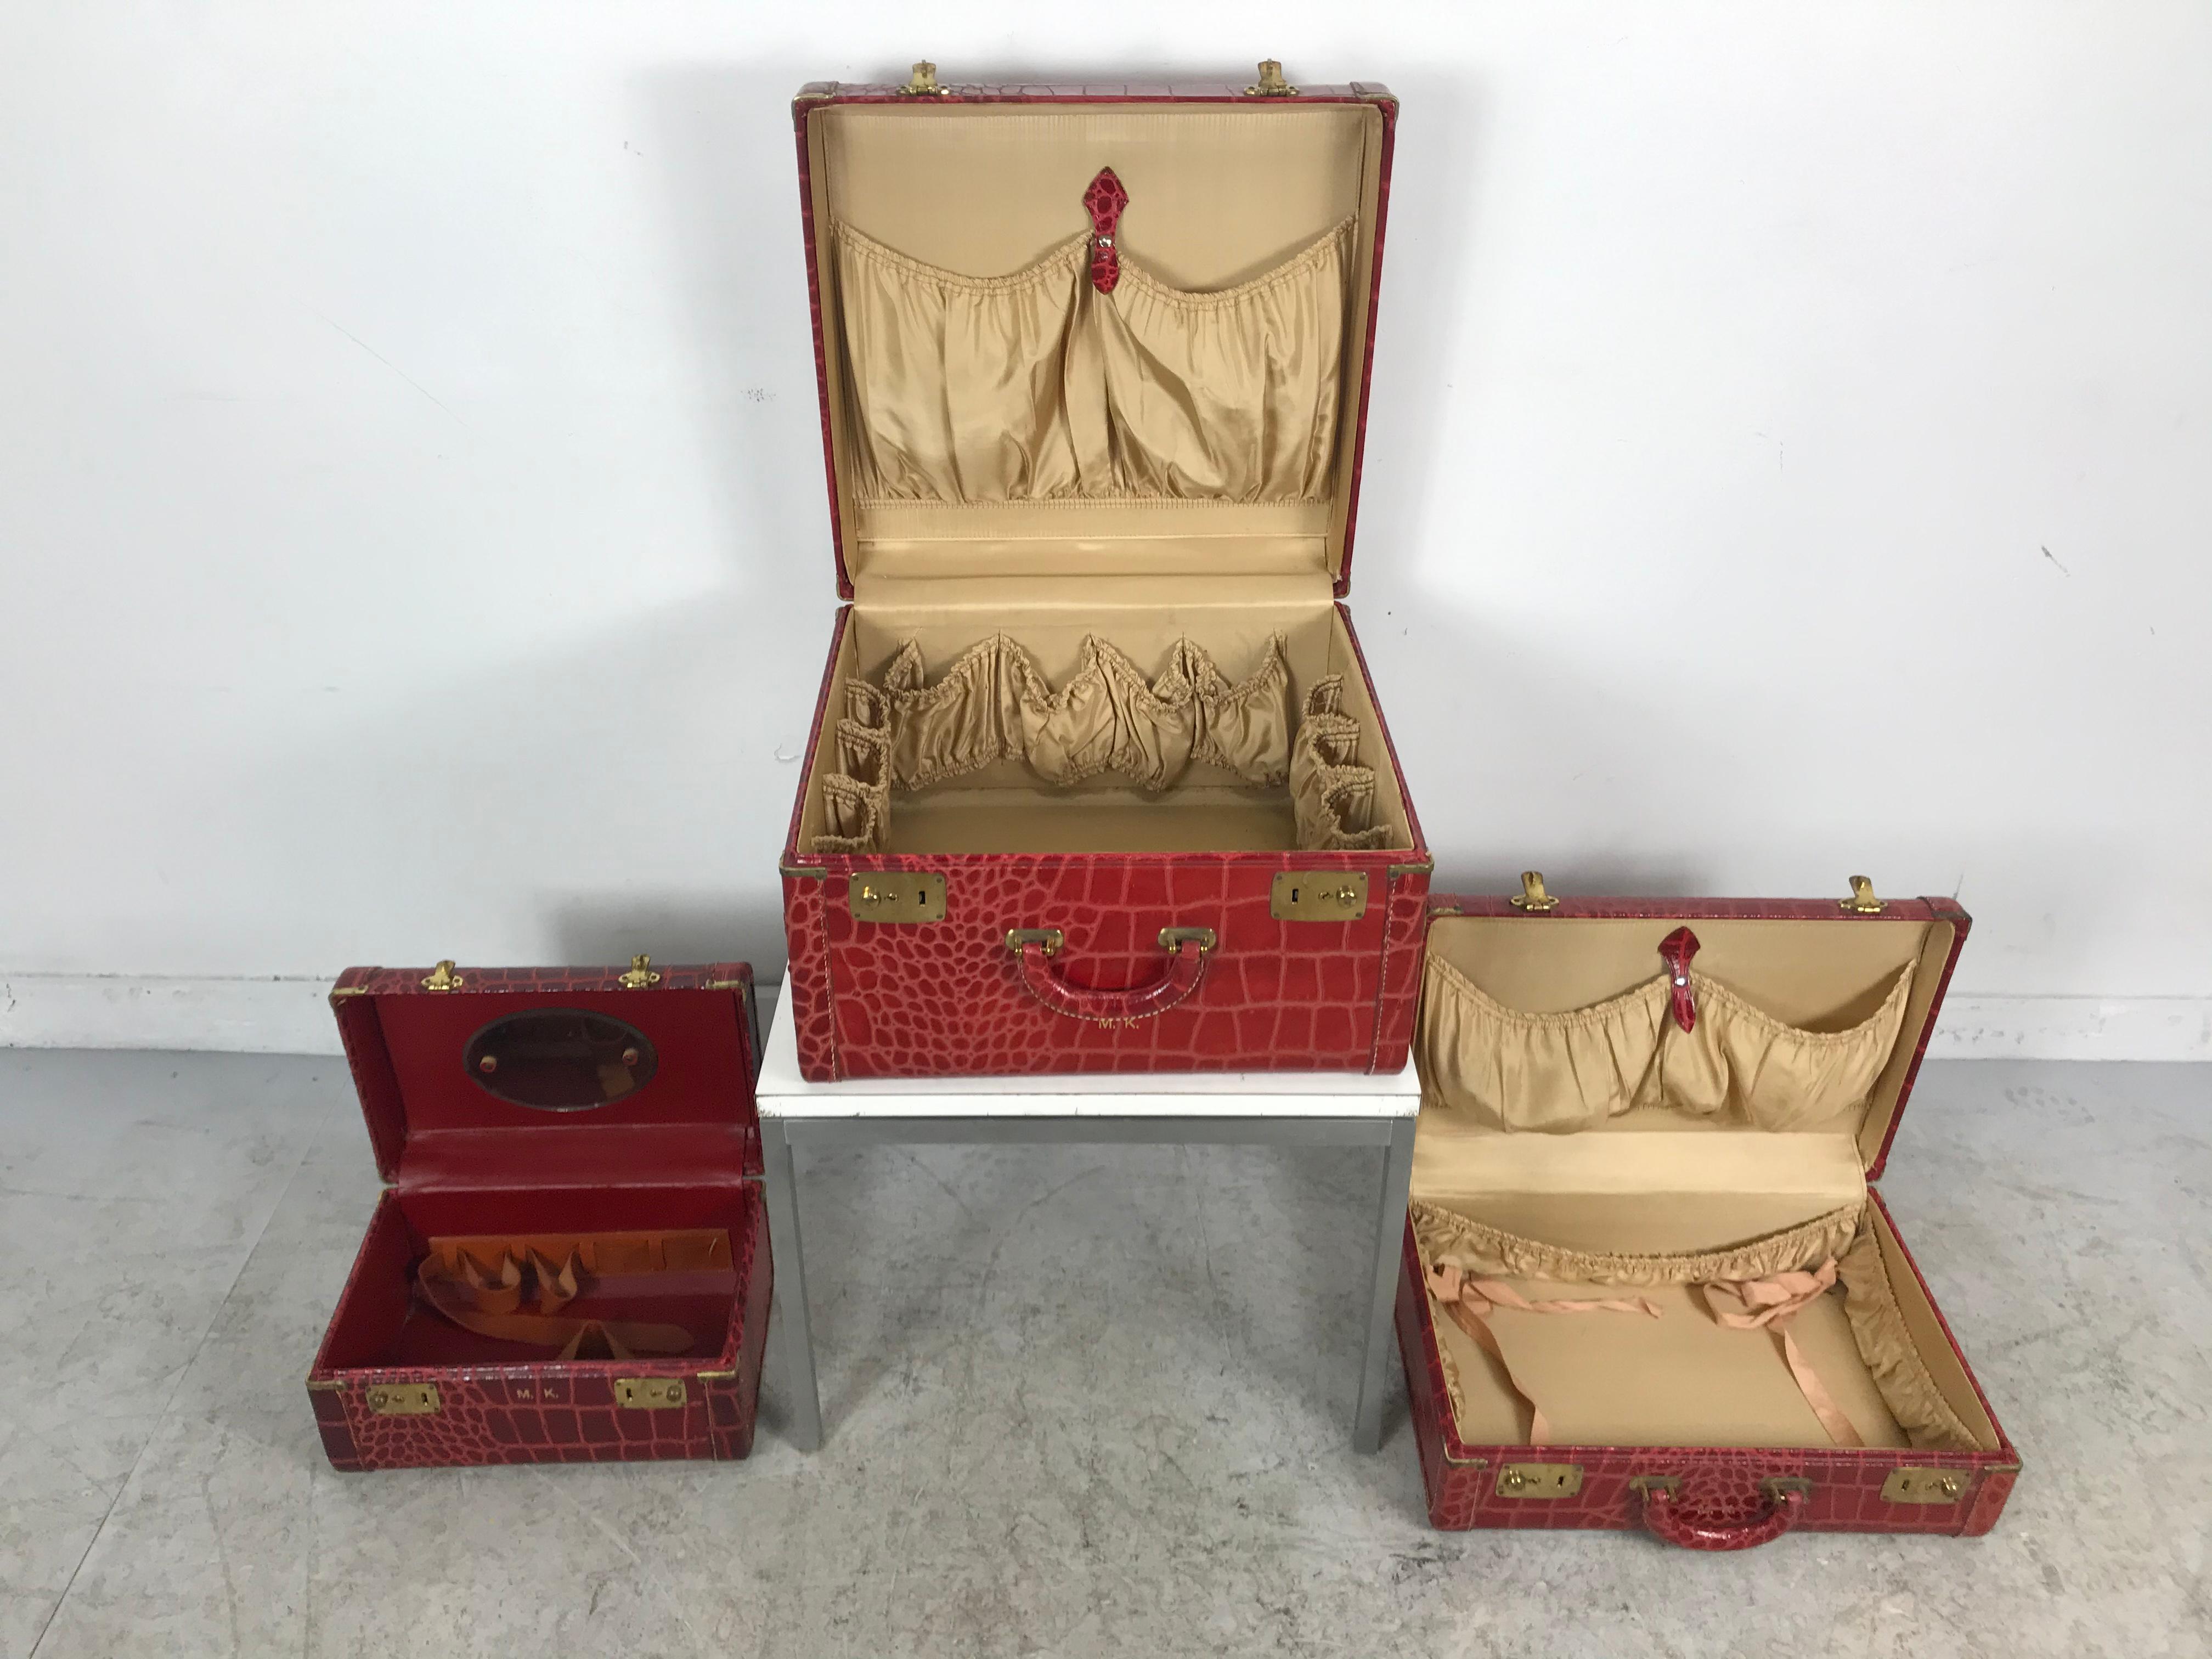 Unusual set of 3 red leather, faux alligator luggage, complete with two suitcase's, and cosmetic case. Amazing original condition, smoke fee, pet free, odor free, honestly like new. In certain this set was never used and stored in proper sealed and